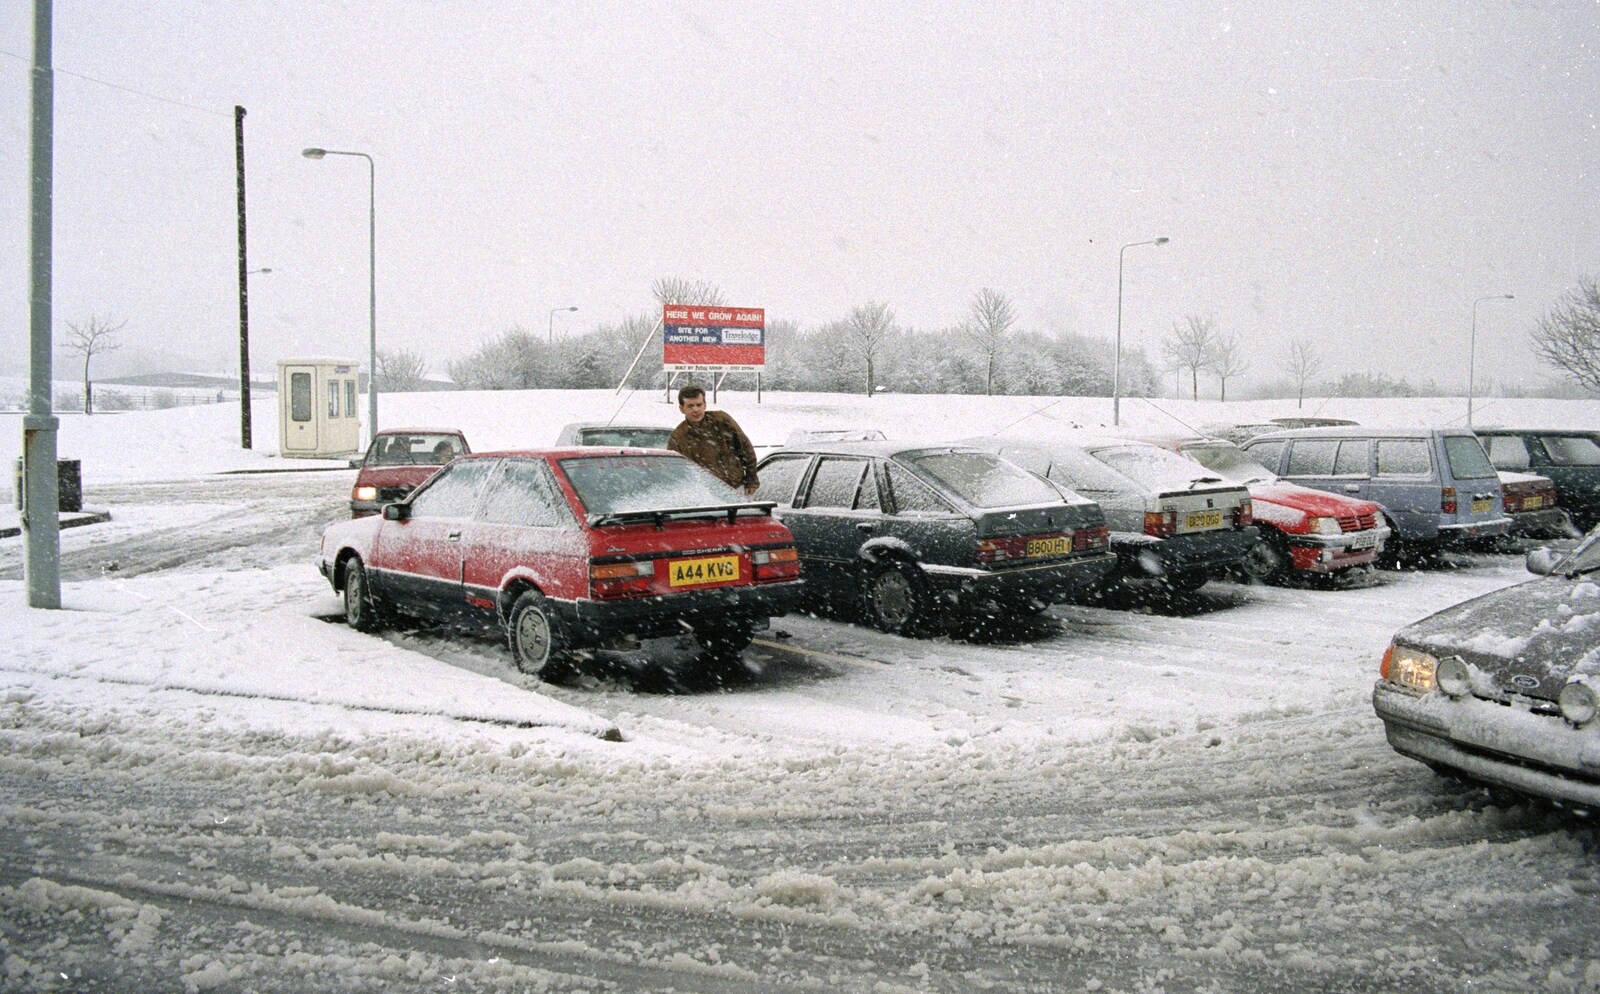 A Trip to Plymouth and Bristol, Avon and Devon - 18th February 1990: Karl locks up his car at Membury services. The sign in the background announces the as-yet unbuilt Travelodge